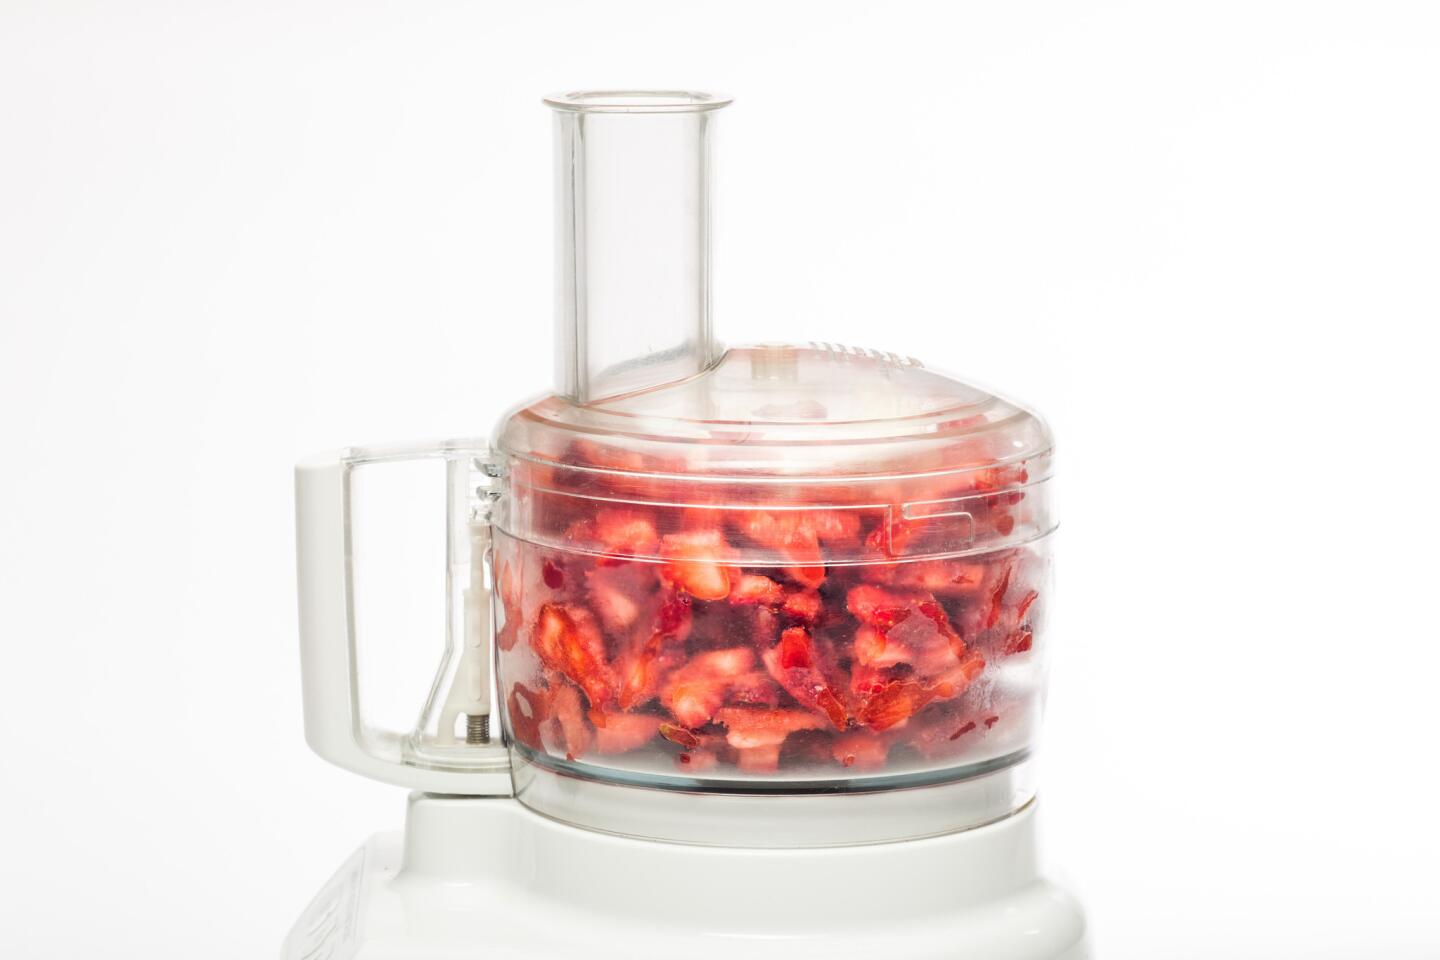 Strawberries in a food processor